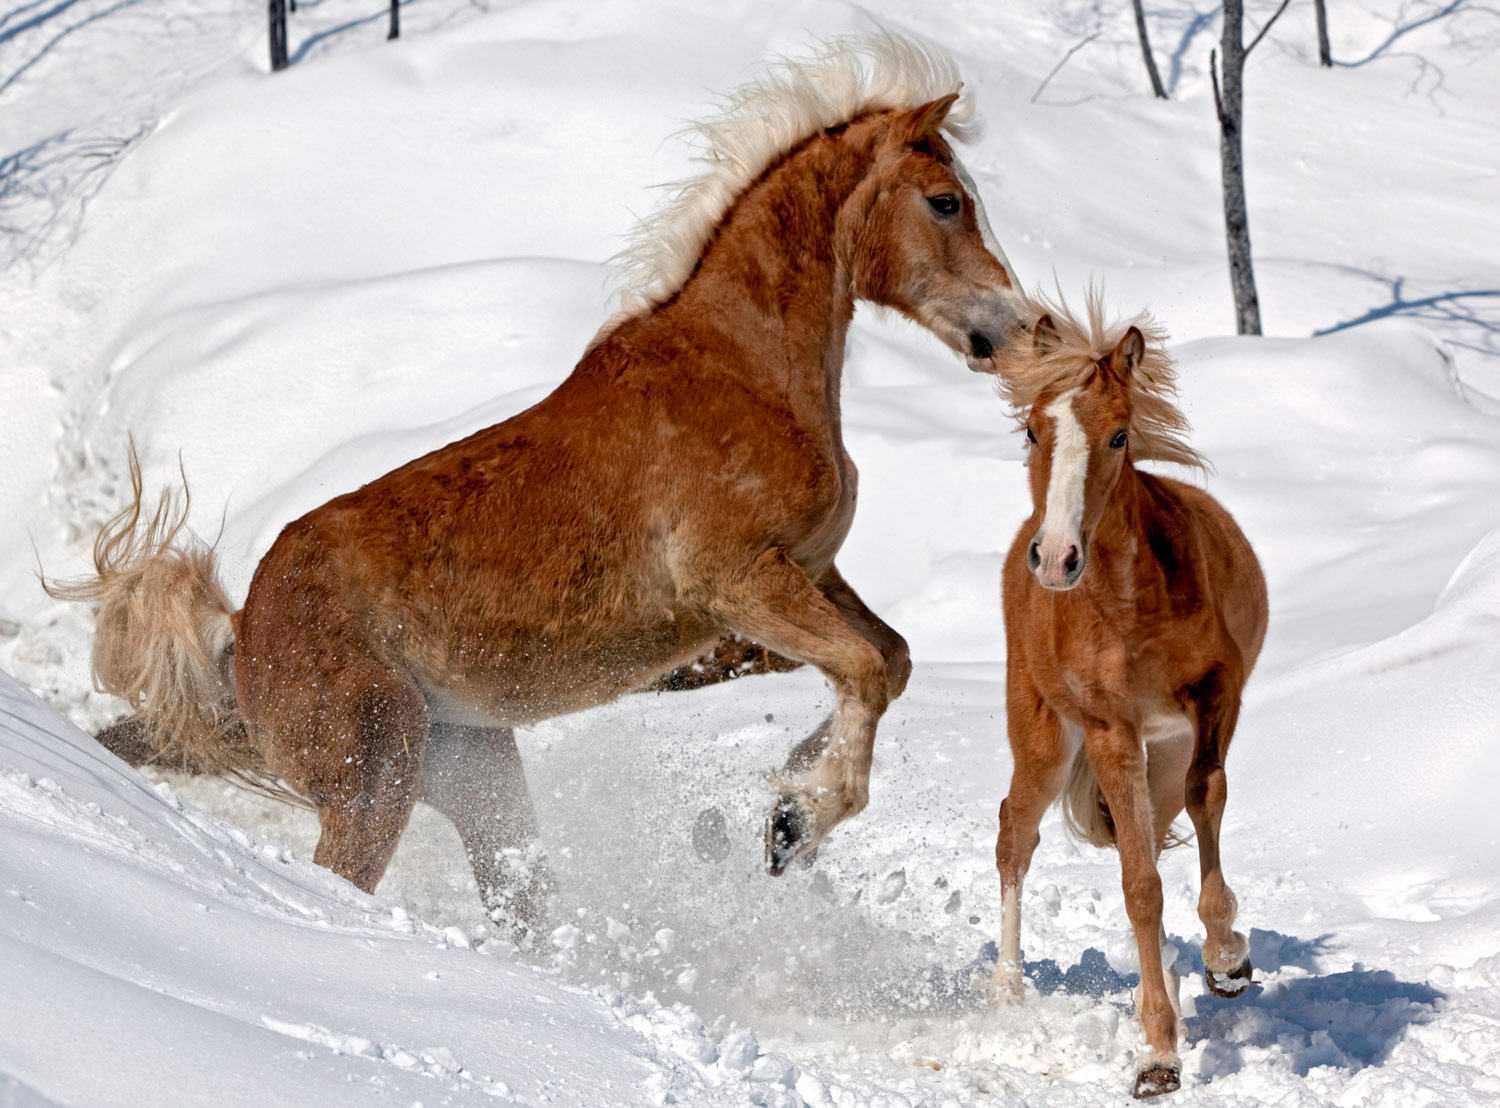 Winter Travel Tips for Equestrians